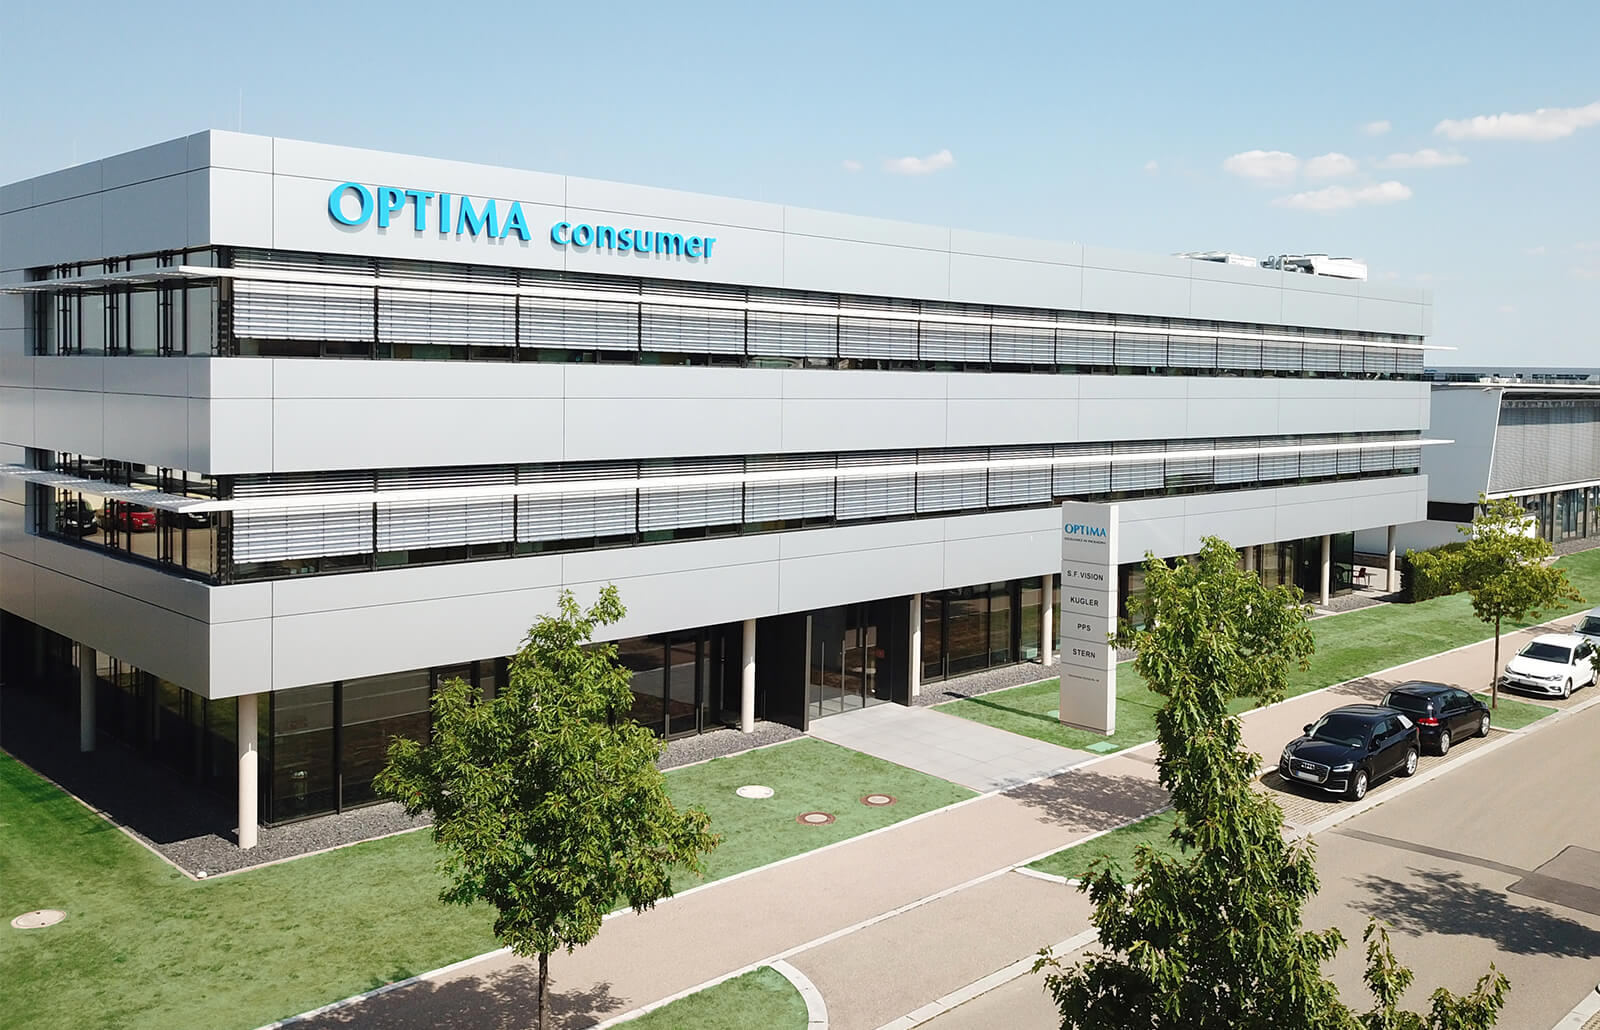 100 YEARS OF - for the OPTIMA Room future